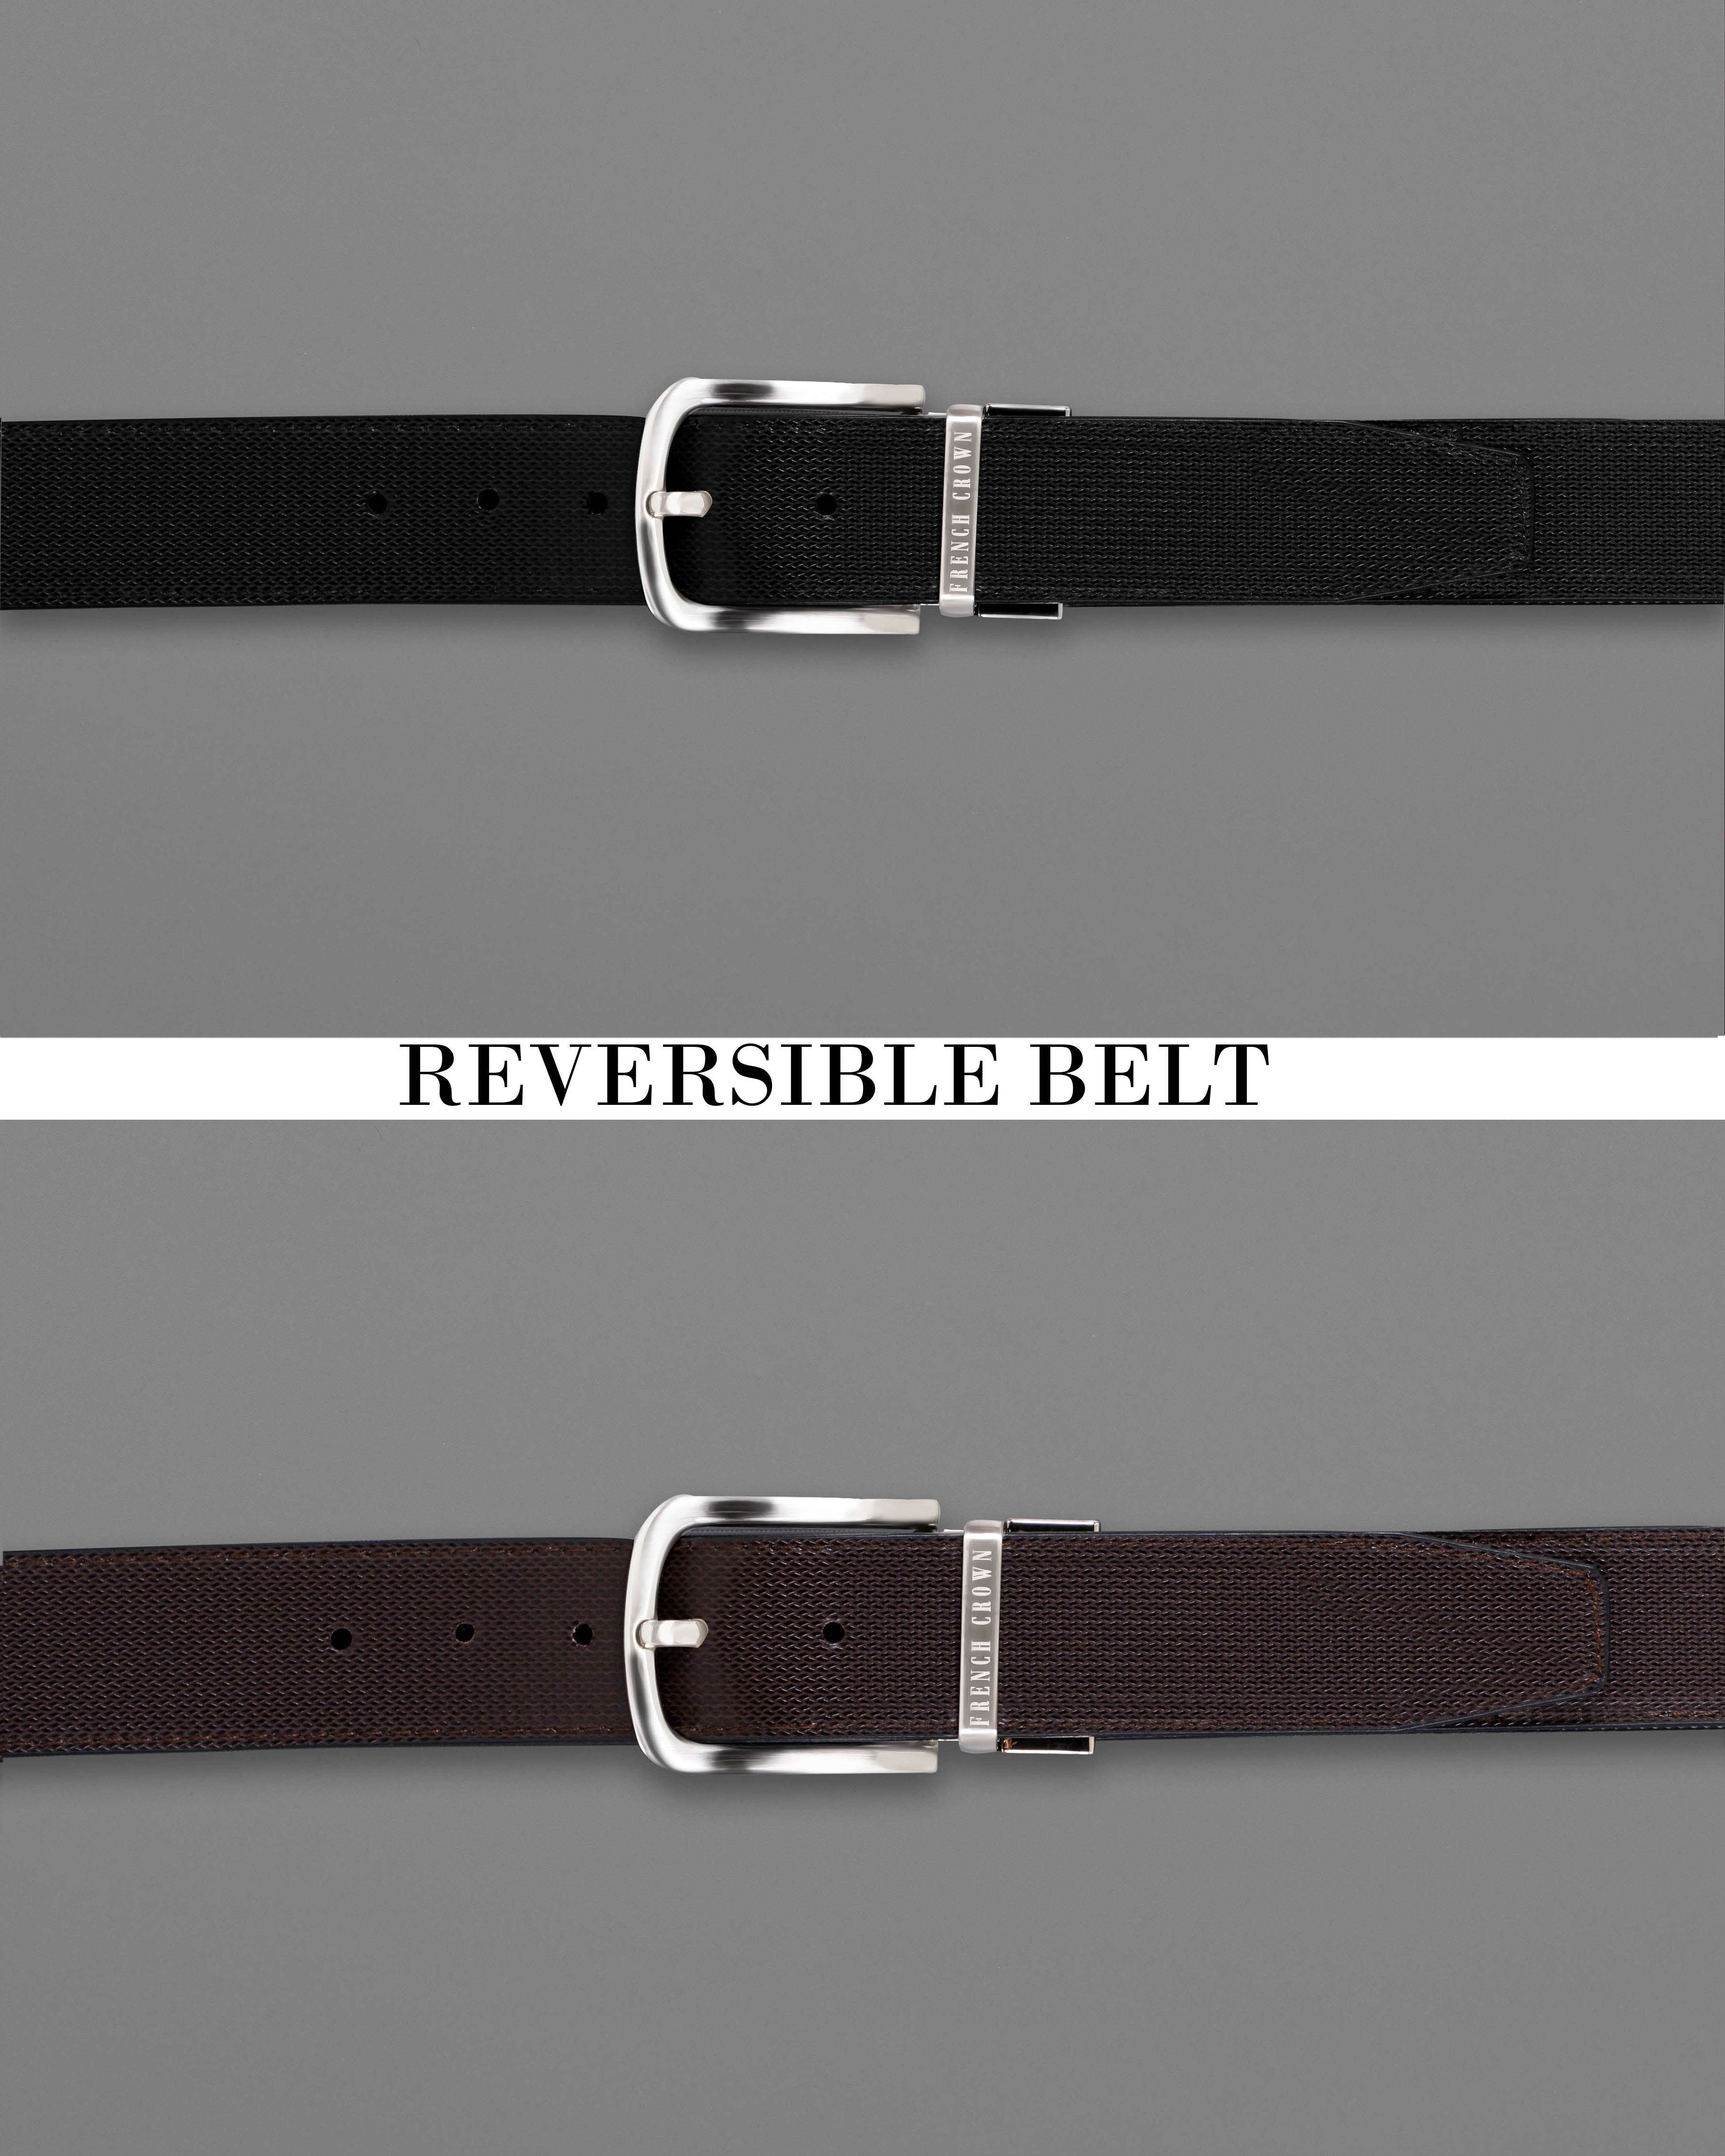 Silver Shiny Buckle With Jade Black and Brown  Leather Free Handcrafted Reversible Belt BT096-28, BT096-30, BT096-32, BT096-34, BT096-36, BT096-38